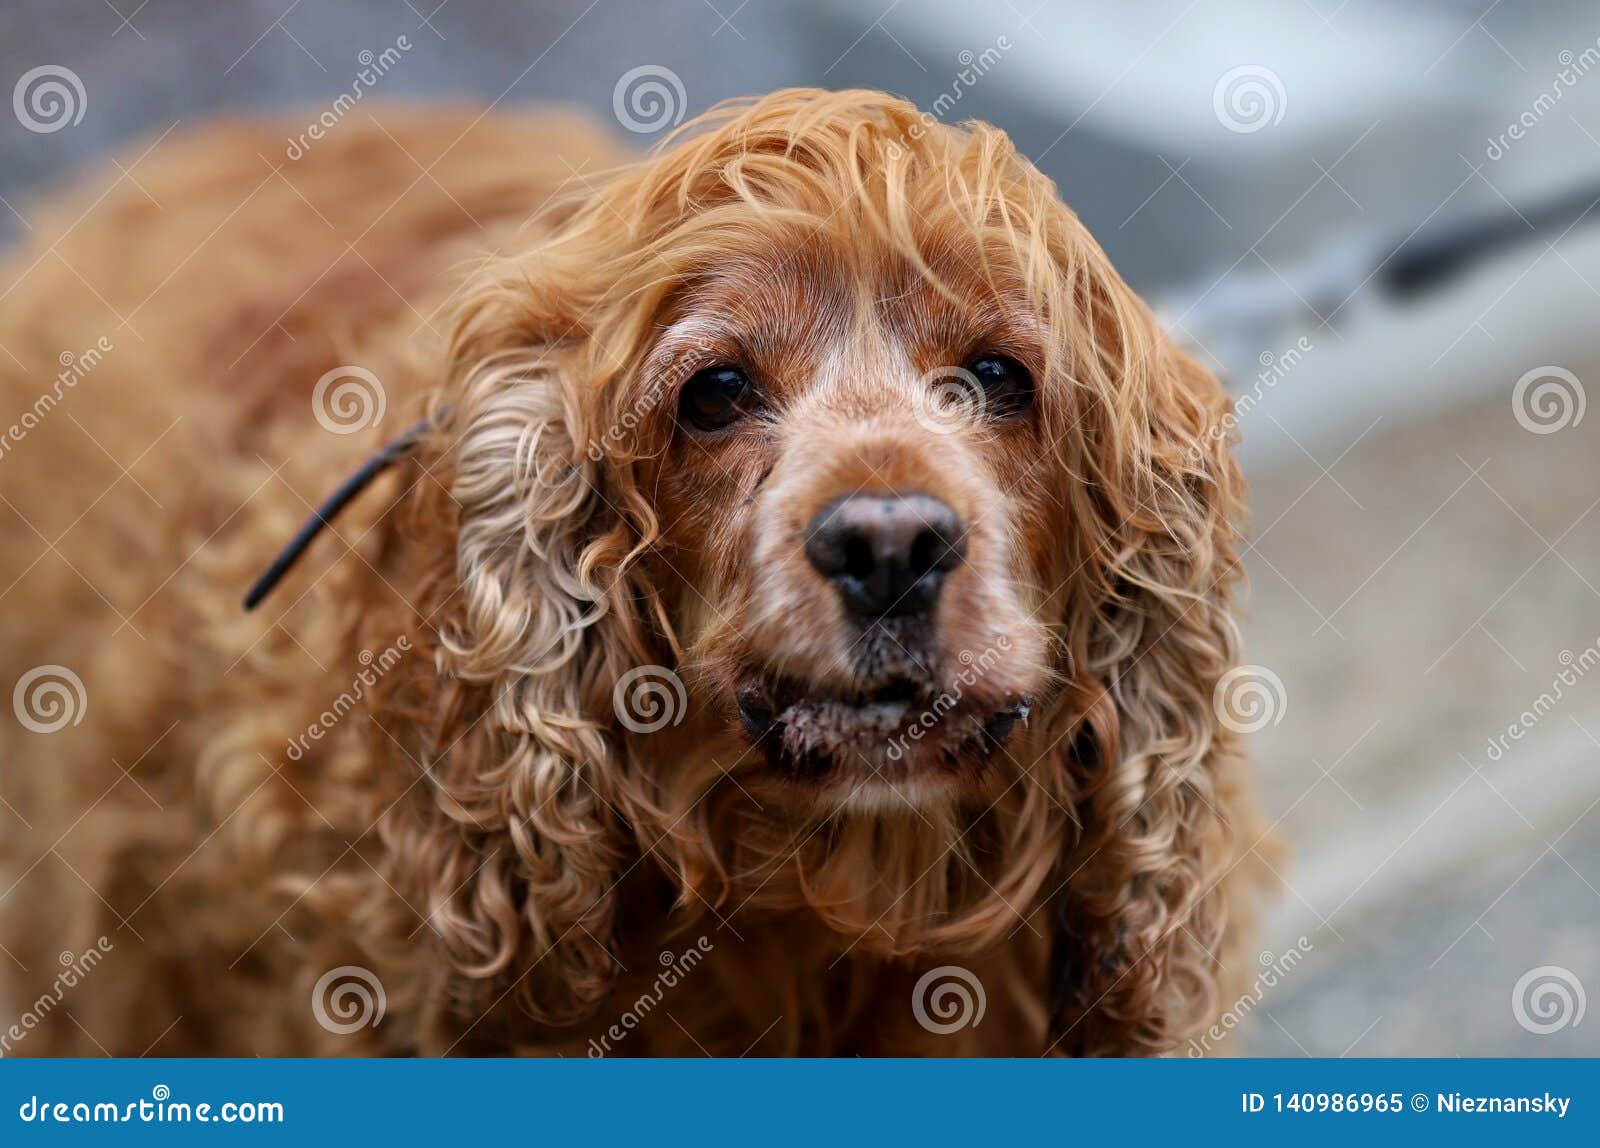 Dog, portrait of a spaniel stock image. Image of teeth - 140986965